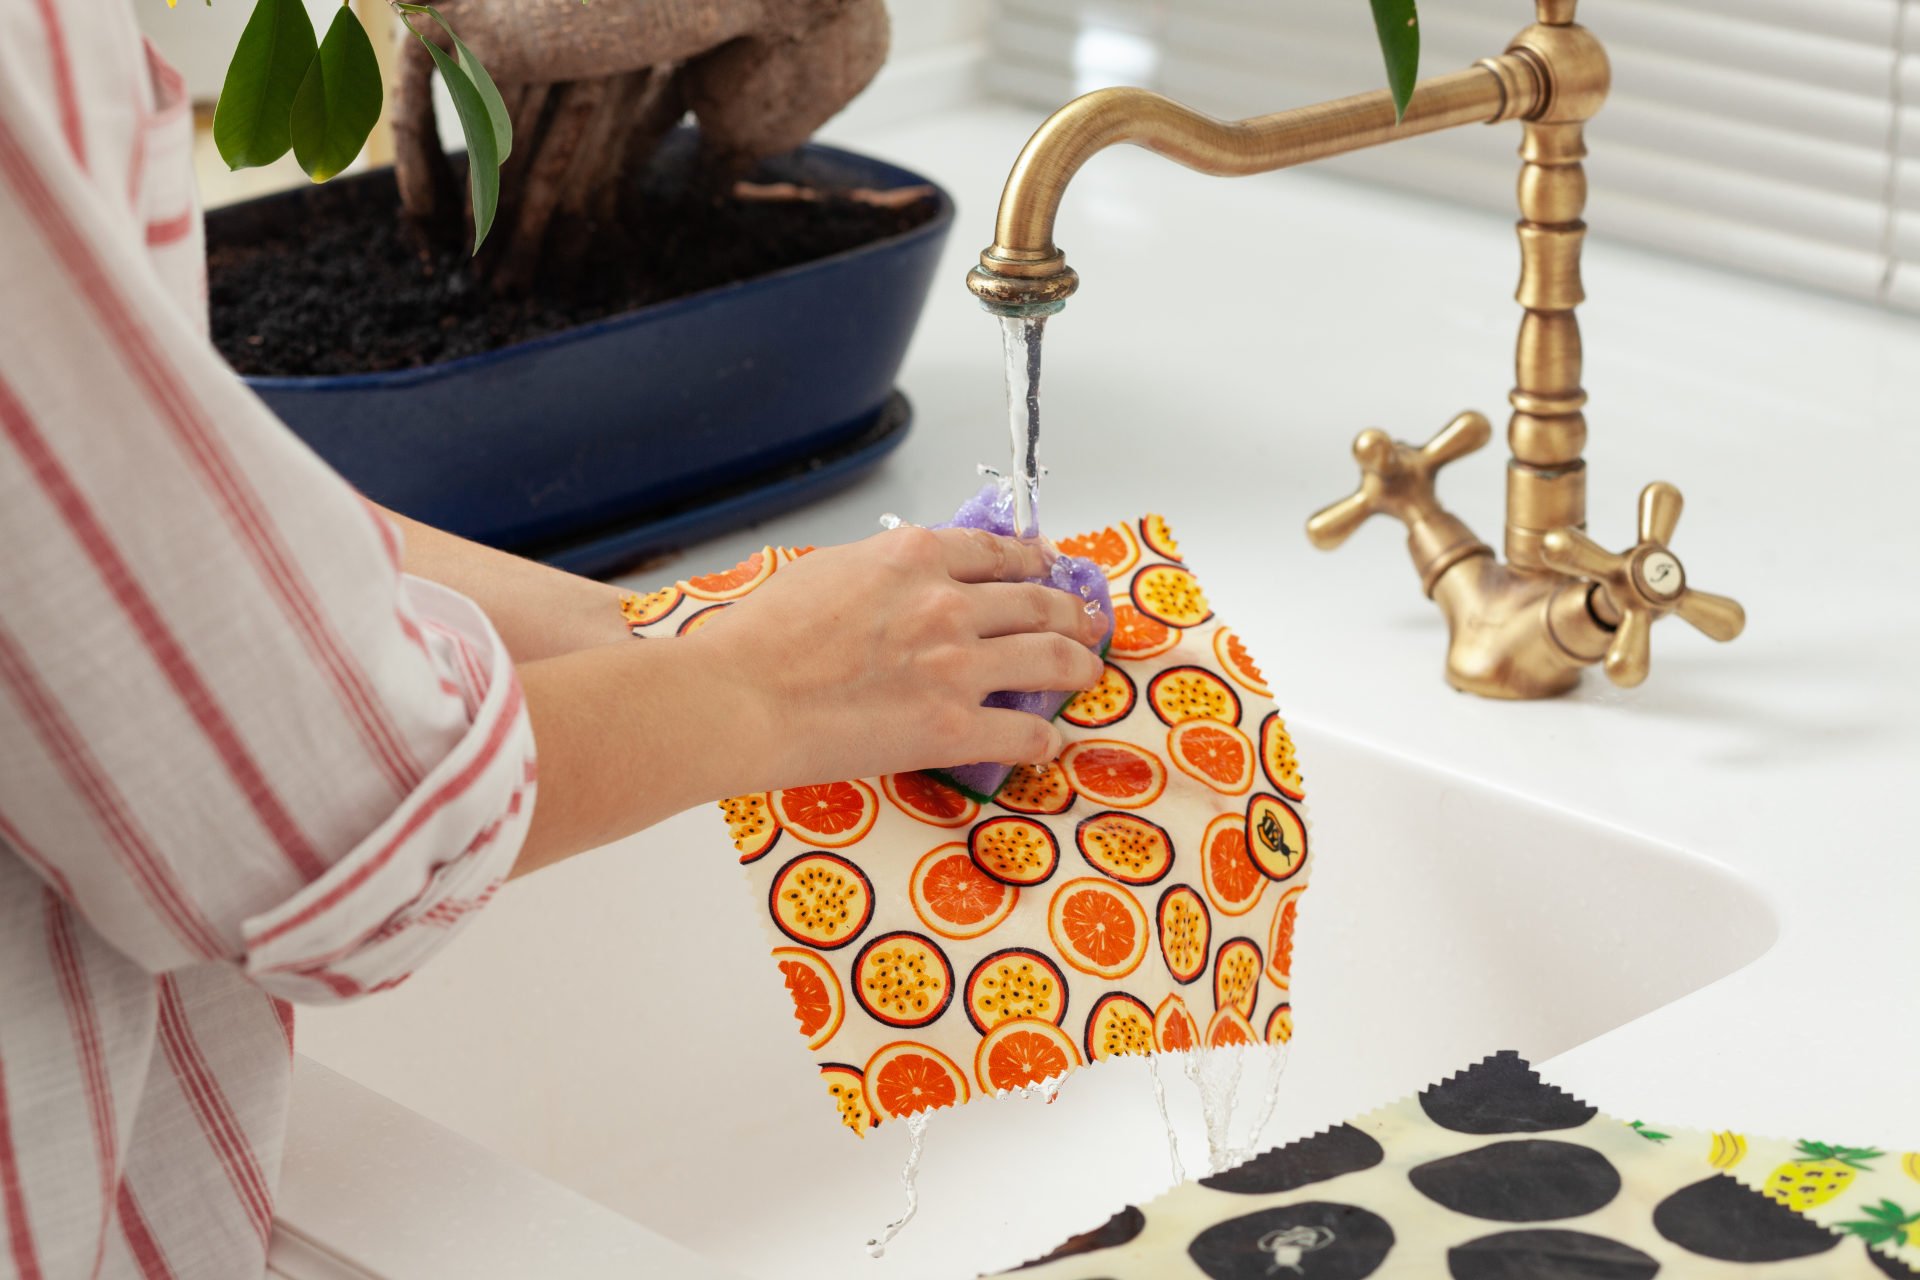 How to Clean Beeswax Wraps?